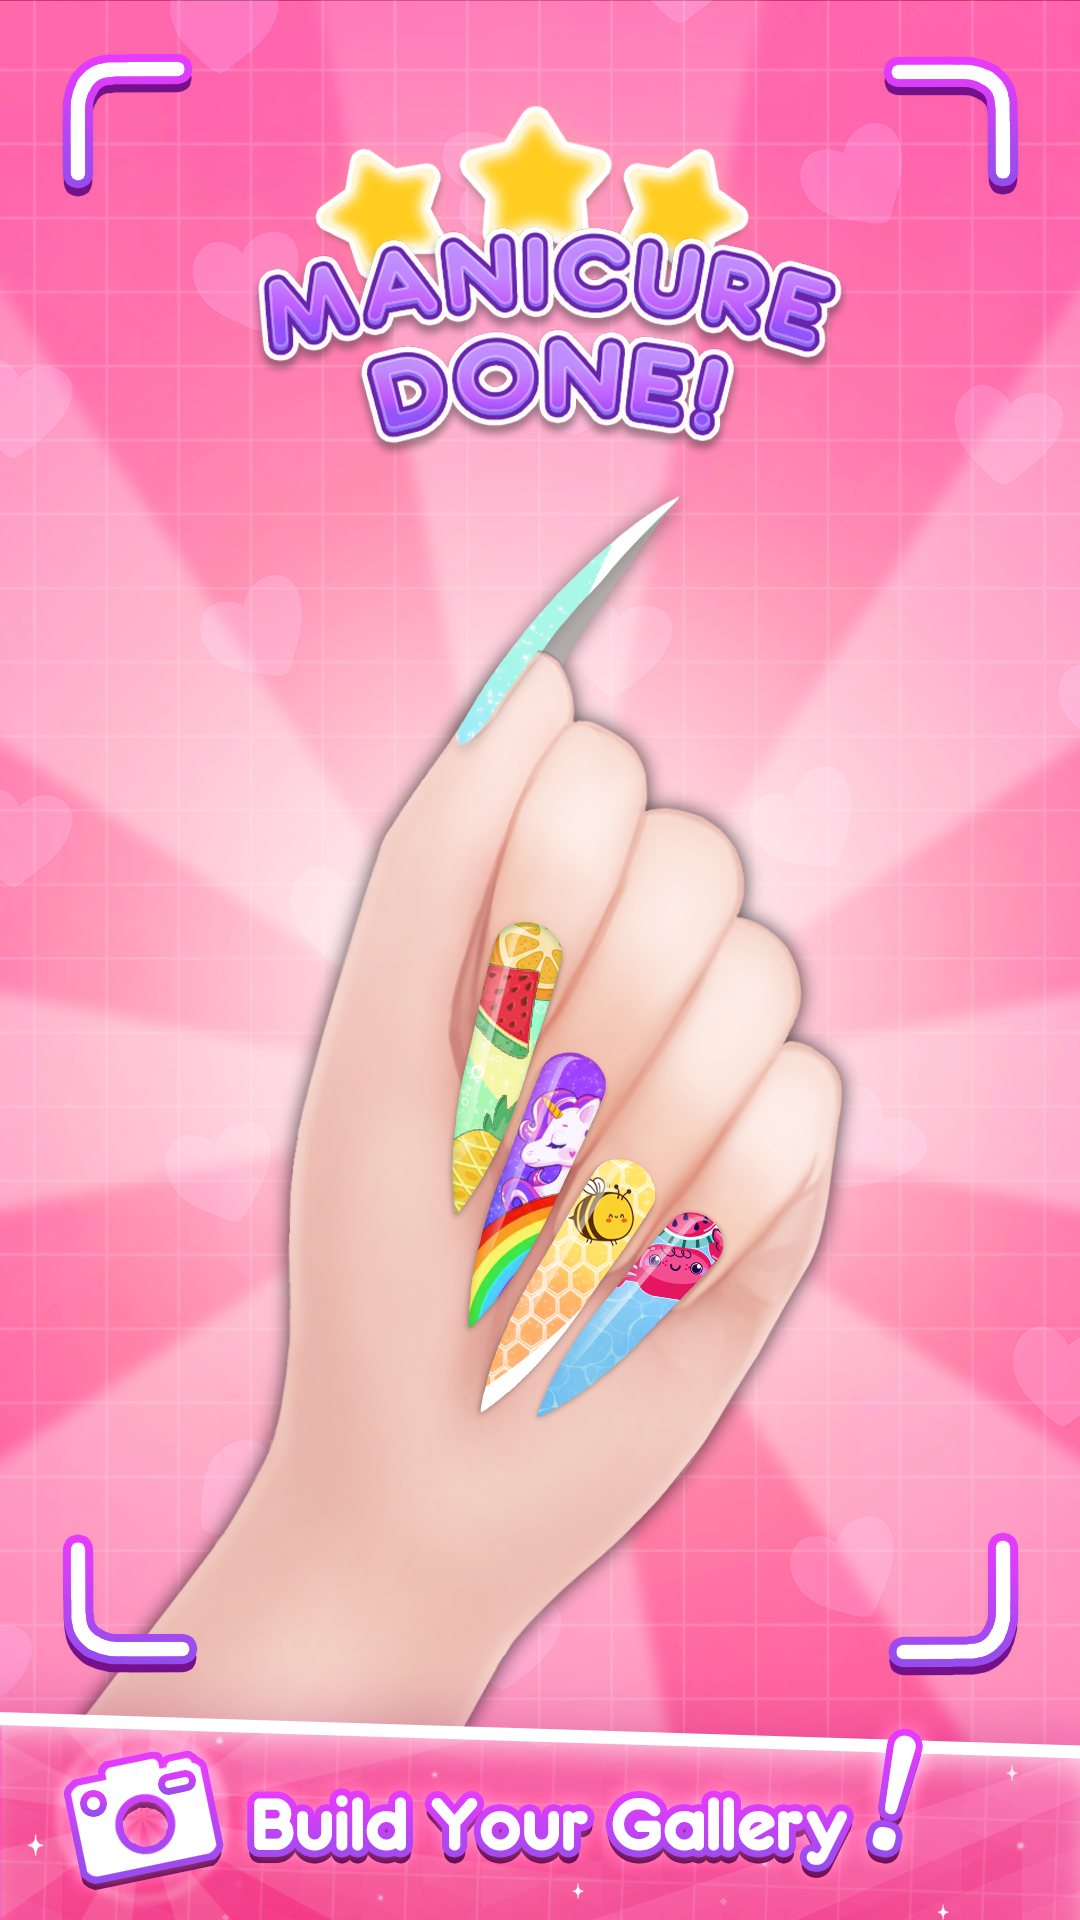 Girls Nail Salon Nail Games mod apk unlimited money-Girls Nail Salon Nail  Games mod apk unlimited money 1.2.9-APK3 Android website